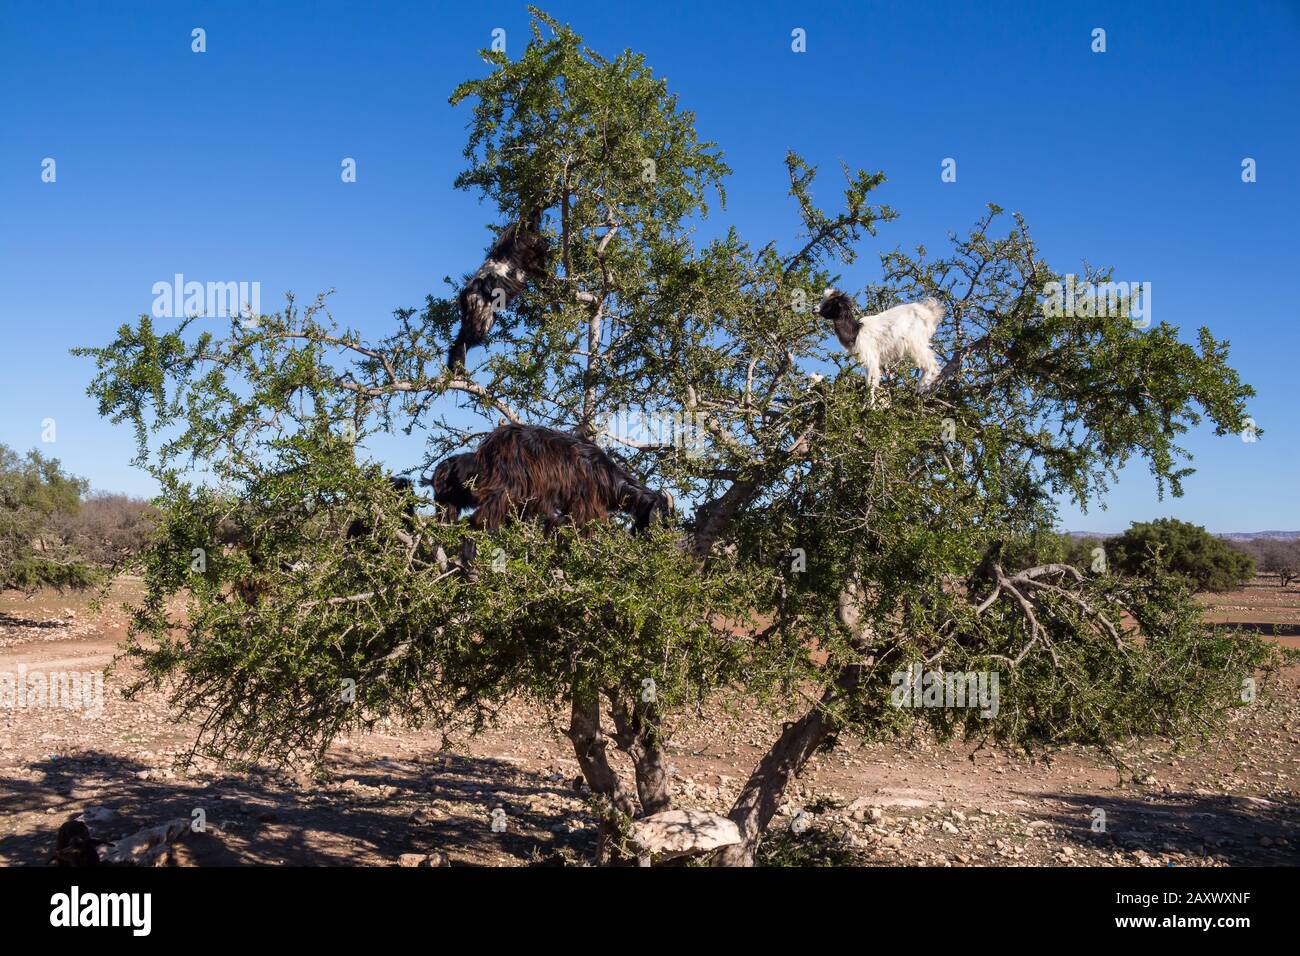 Dry soil sith a green argan tree and a herd of goats climbing the tree. Bright blue sky. Western coast of Atlantic ocean, Morocco. Stock Photo